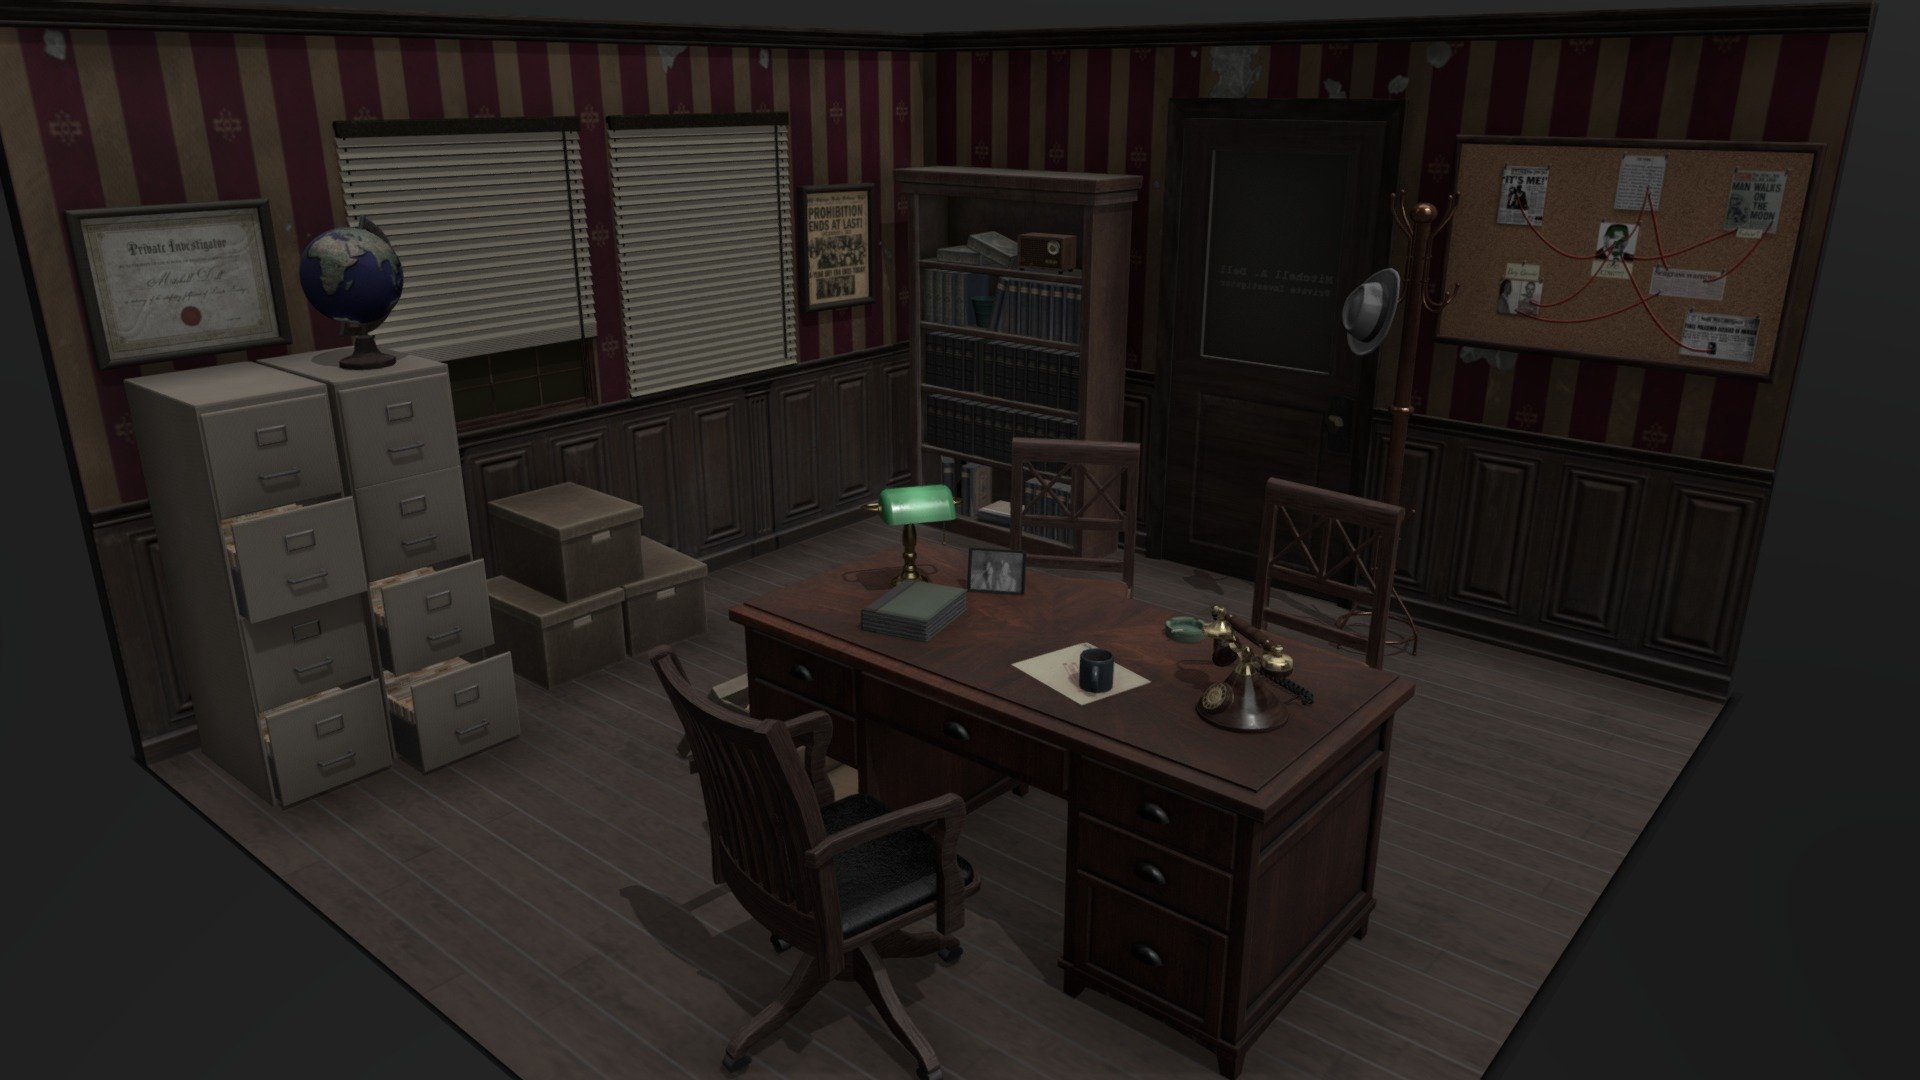 Created a scene based on a private investigator's office in the mid 40s.

Modeled in Maya
Textured in Substance Painter - Noir Office - 3D model by dellmitch 3d model